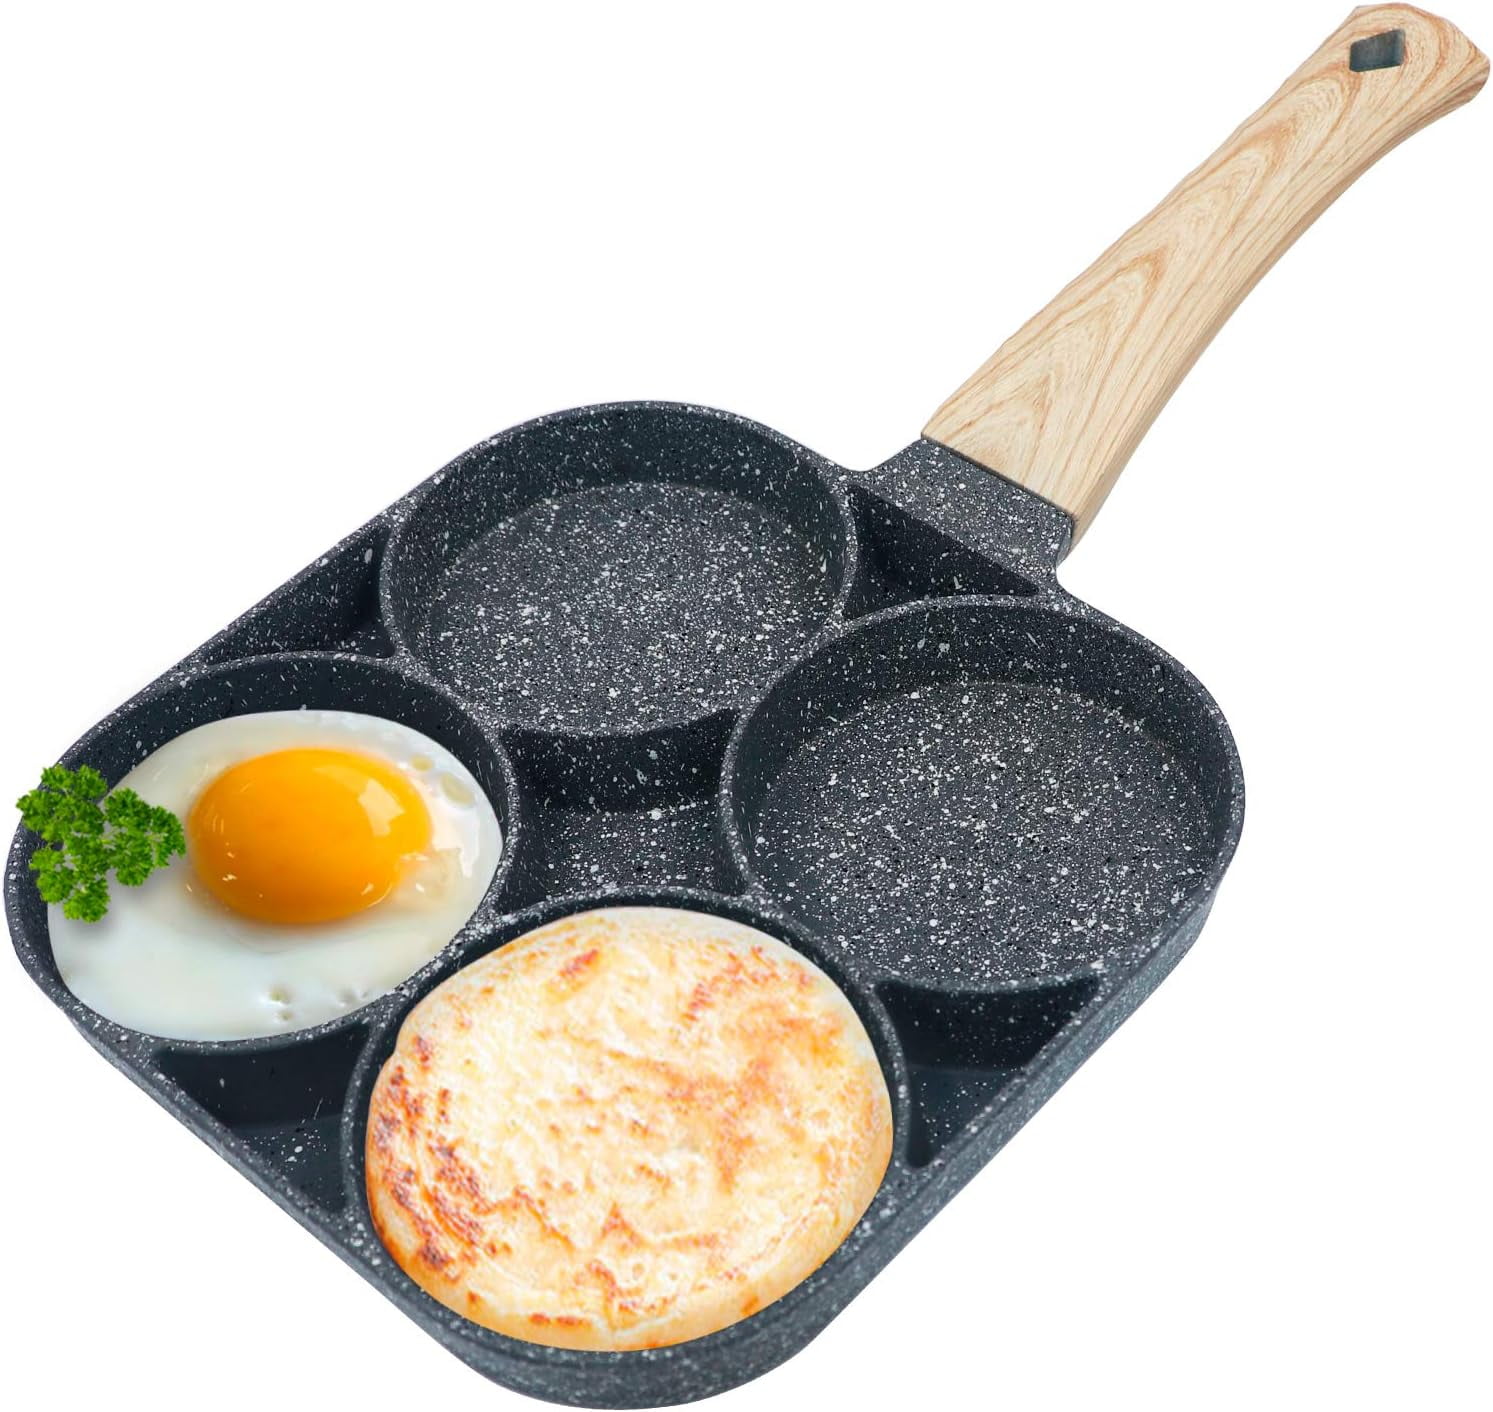 Non Stick 4-Cup Egg Frying Pan with flipping Lid Aluminum Pancake Egg  Cooker with Spatula and Brush Burgers Omelet Cooking Pan